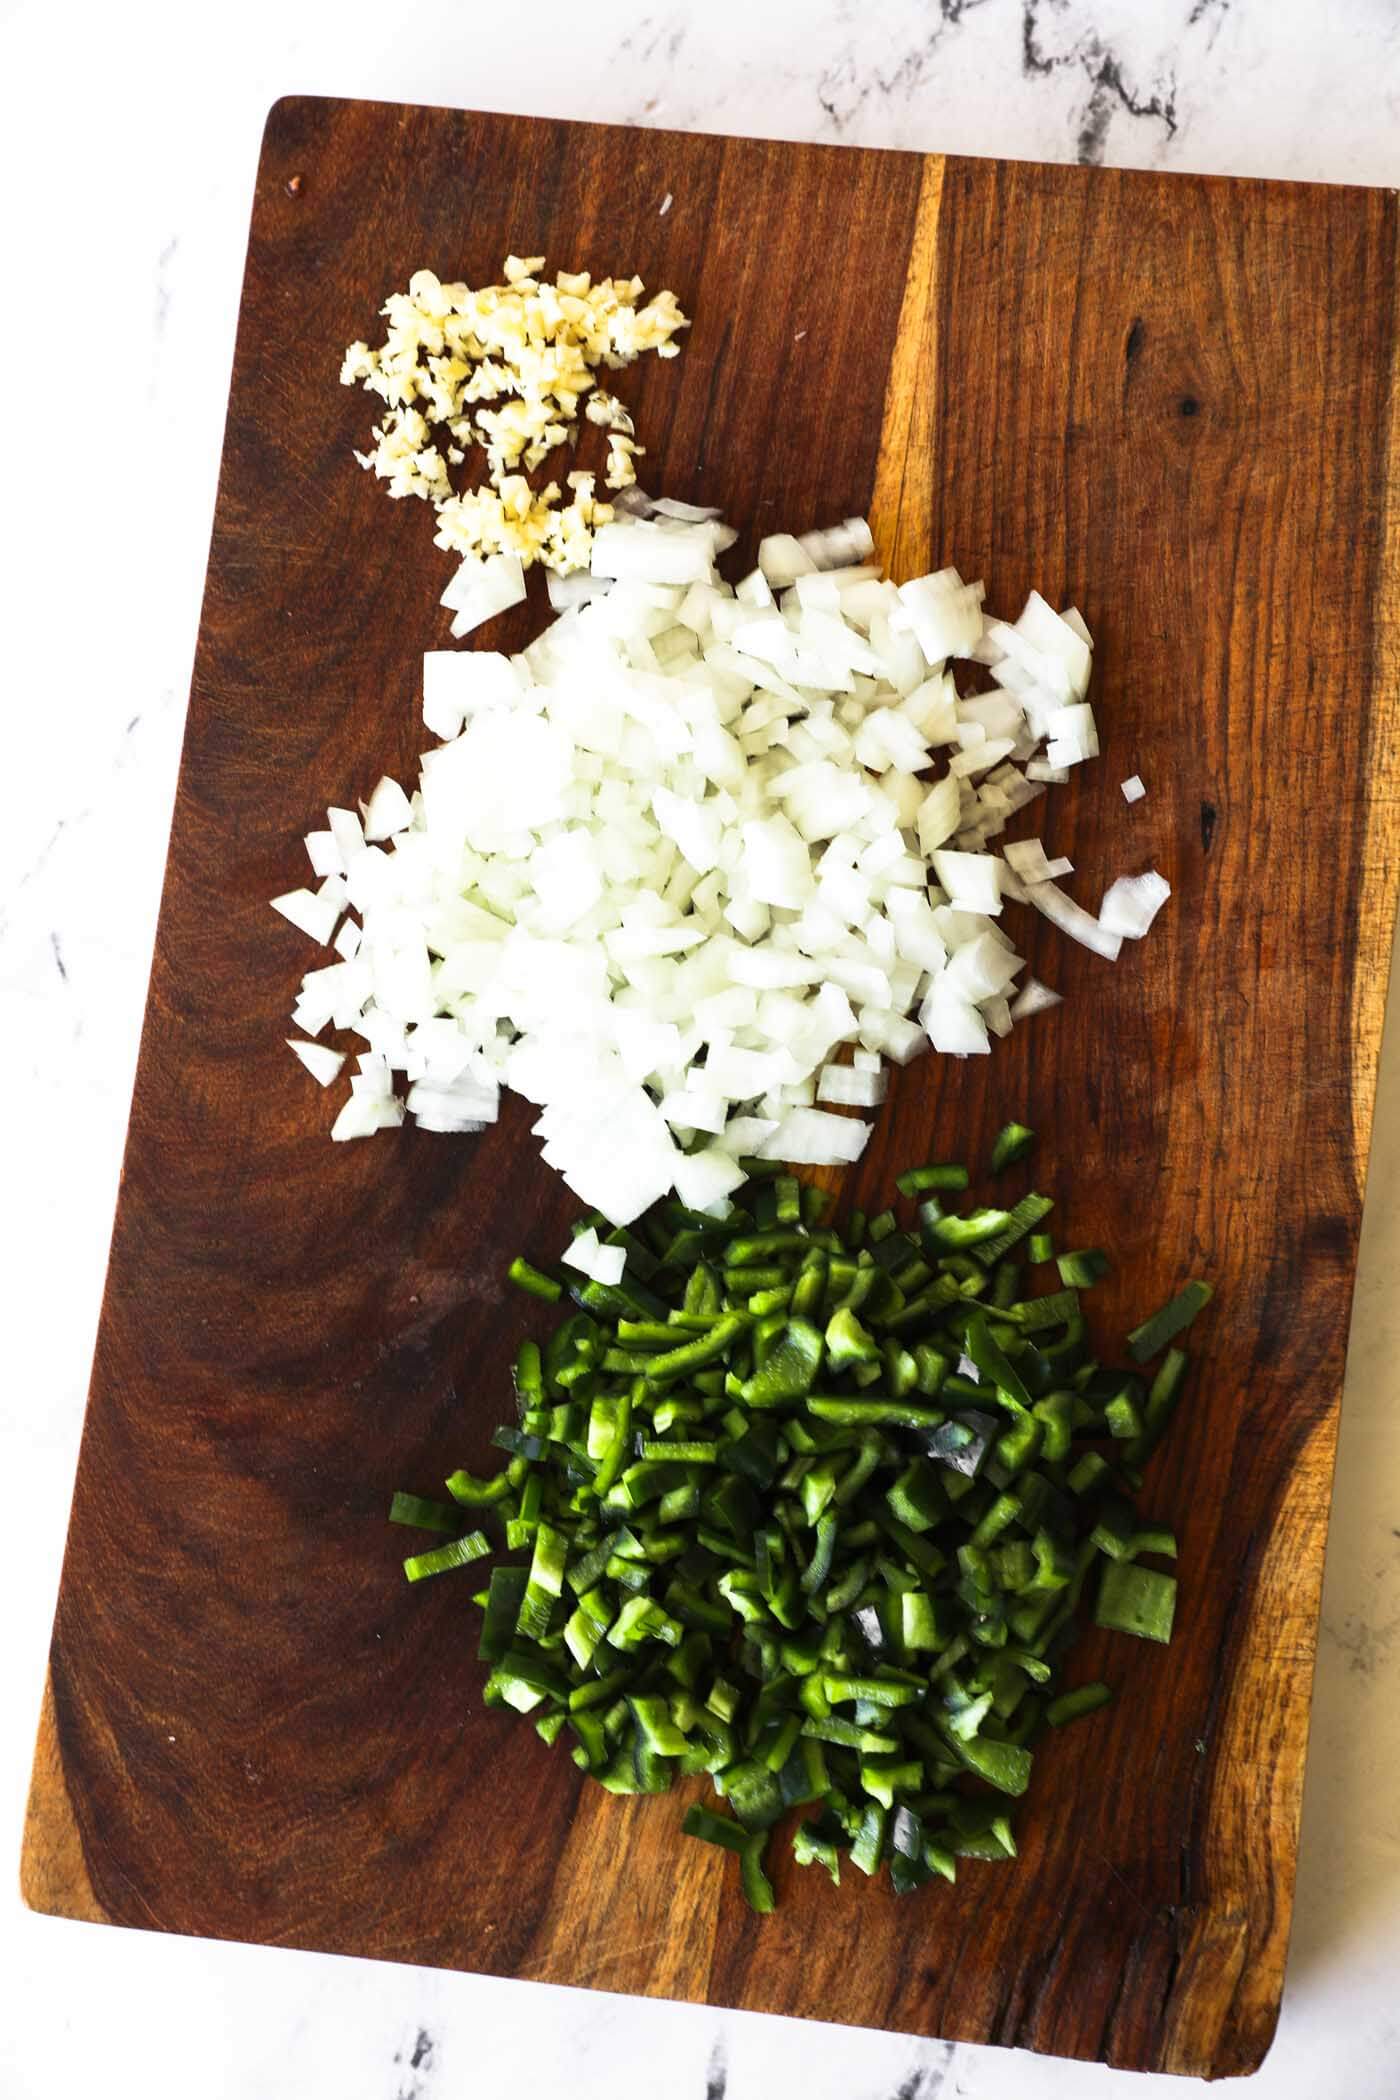 Diced onion, poblano pepper and garlic on a cutting board.